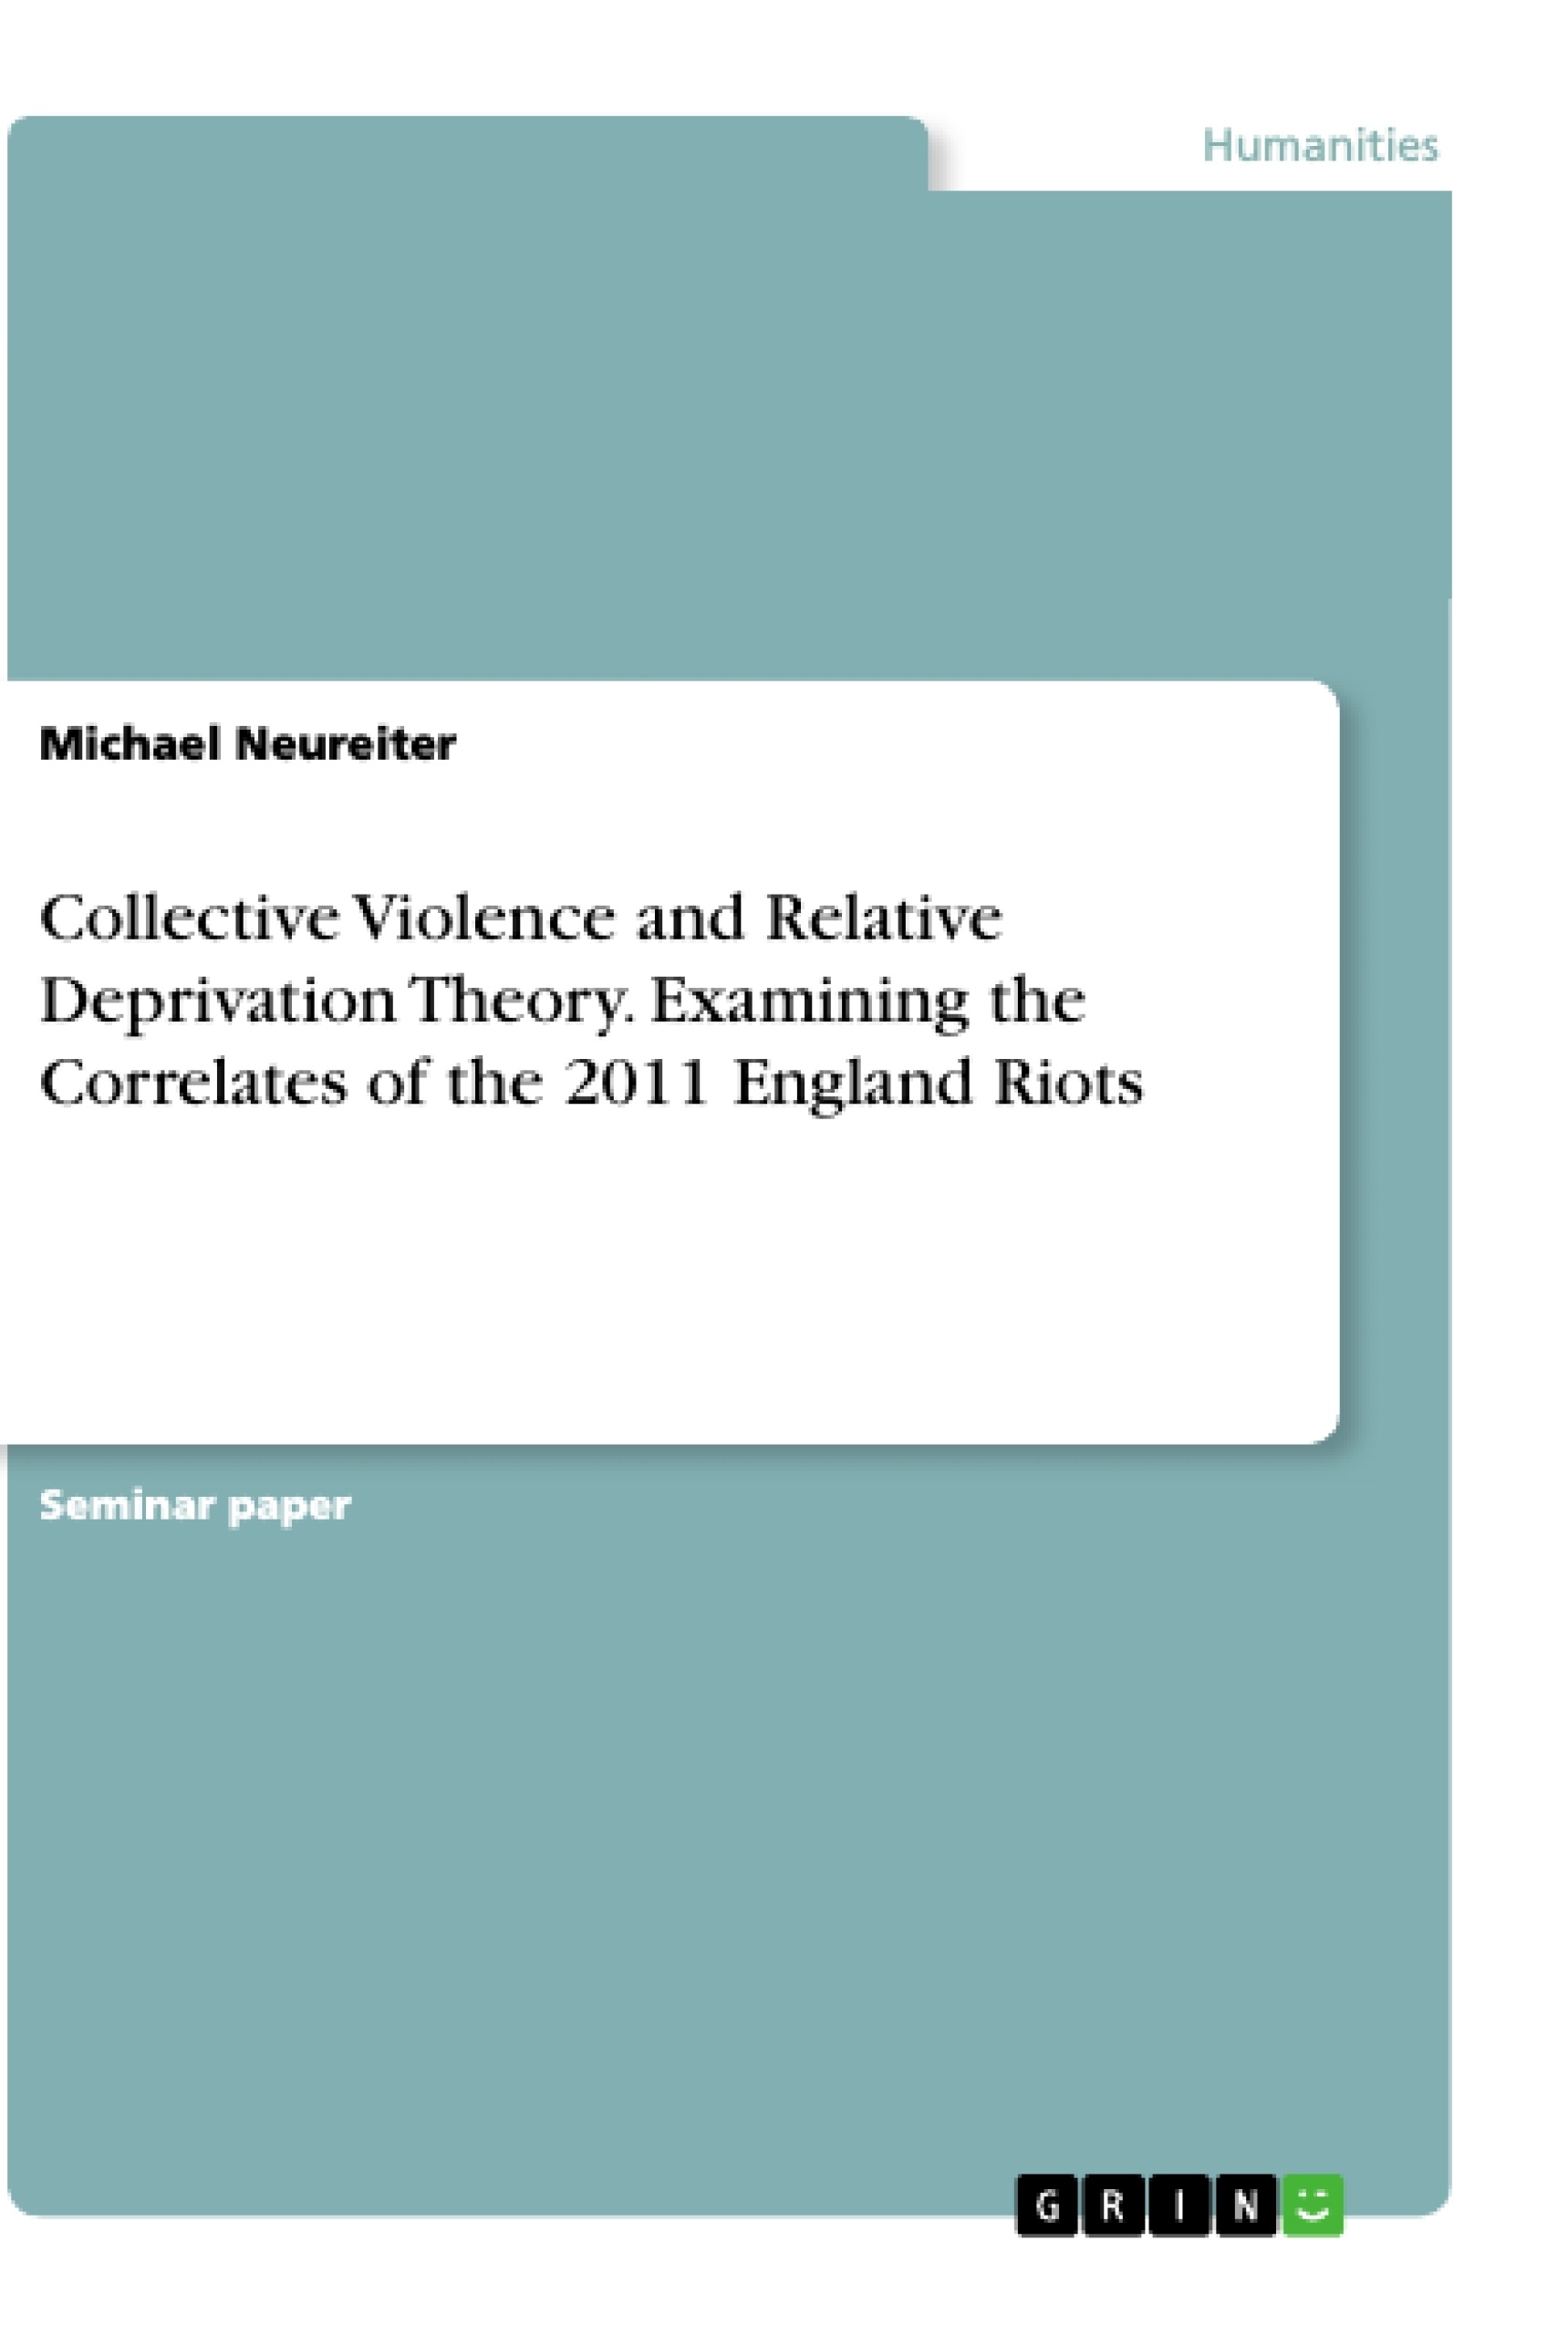 Titel: Collective Violence and Relative Deprivation Theory. Examining the Correlates of the 2011 England Riots